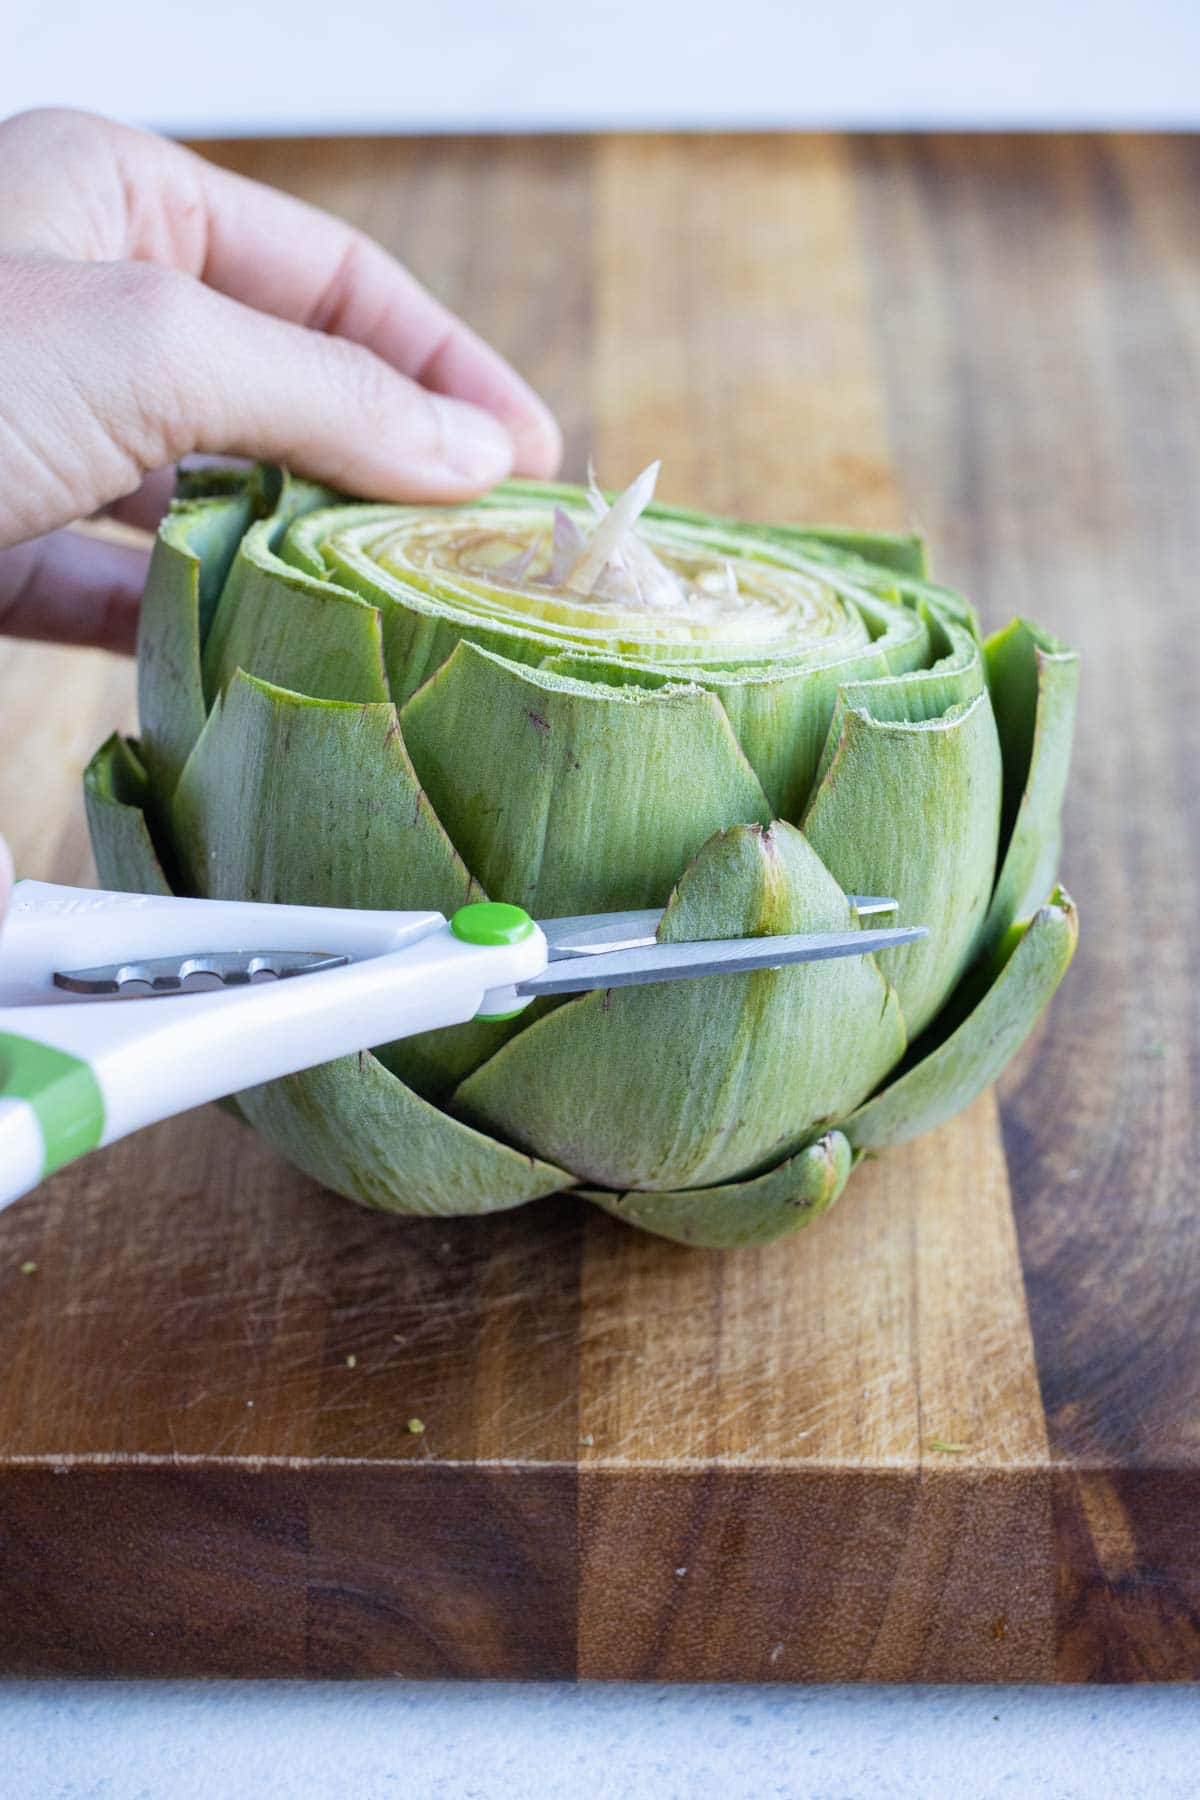 Artichoke leaves are trimmed with kitchen scissors.